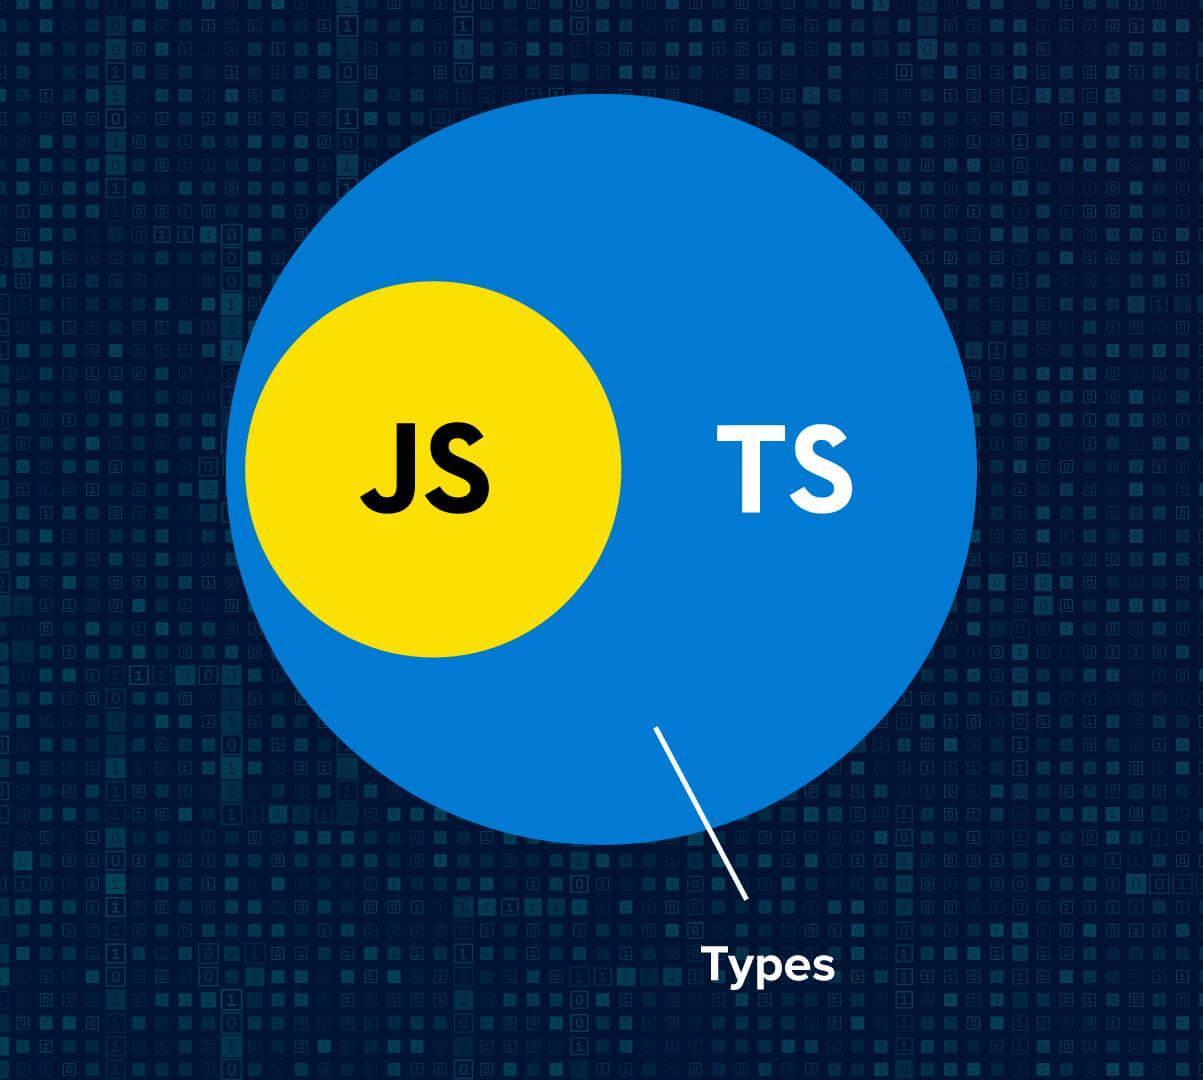 Have You Heard of TypeScript Yet?